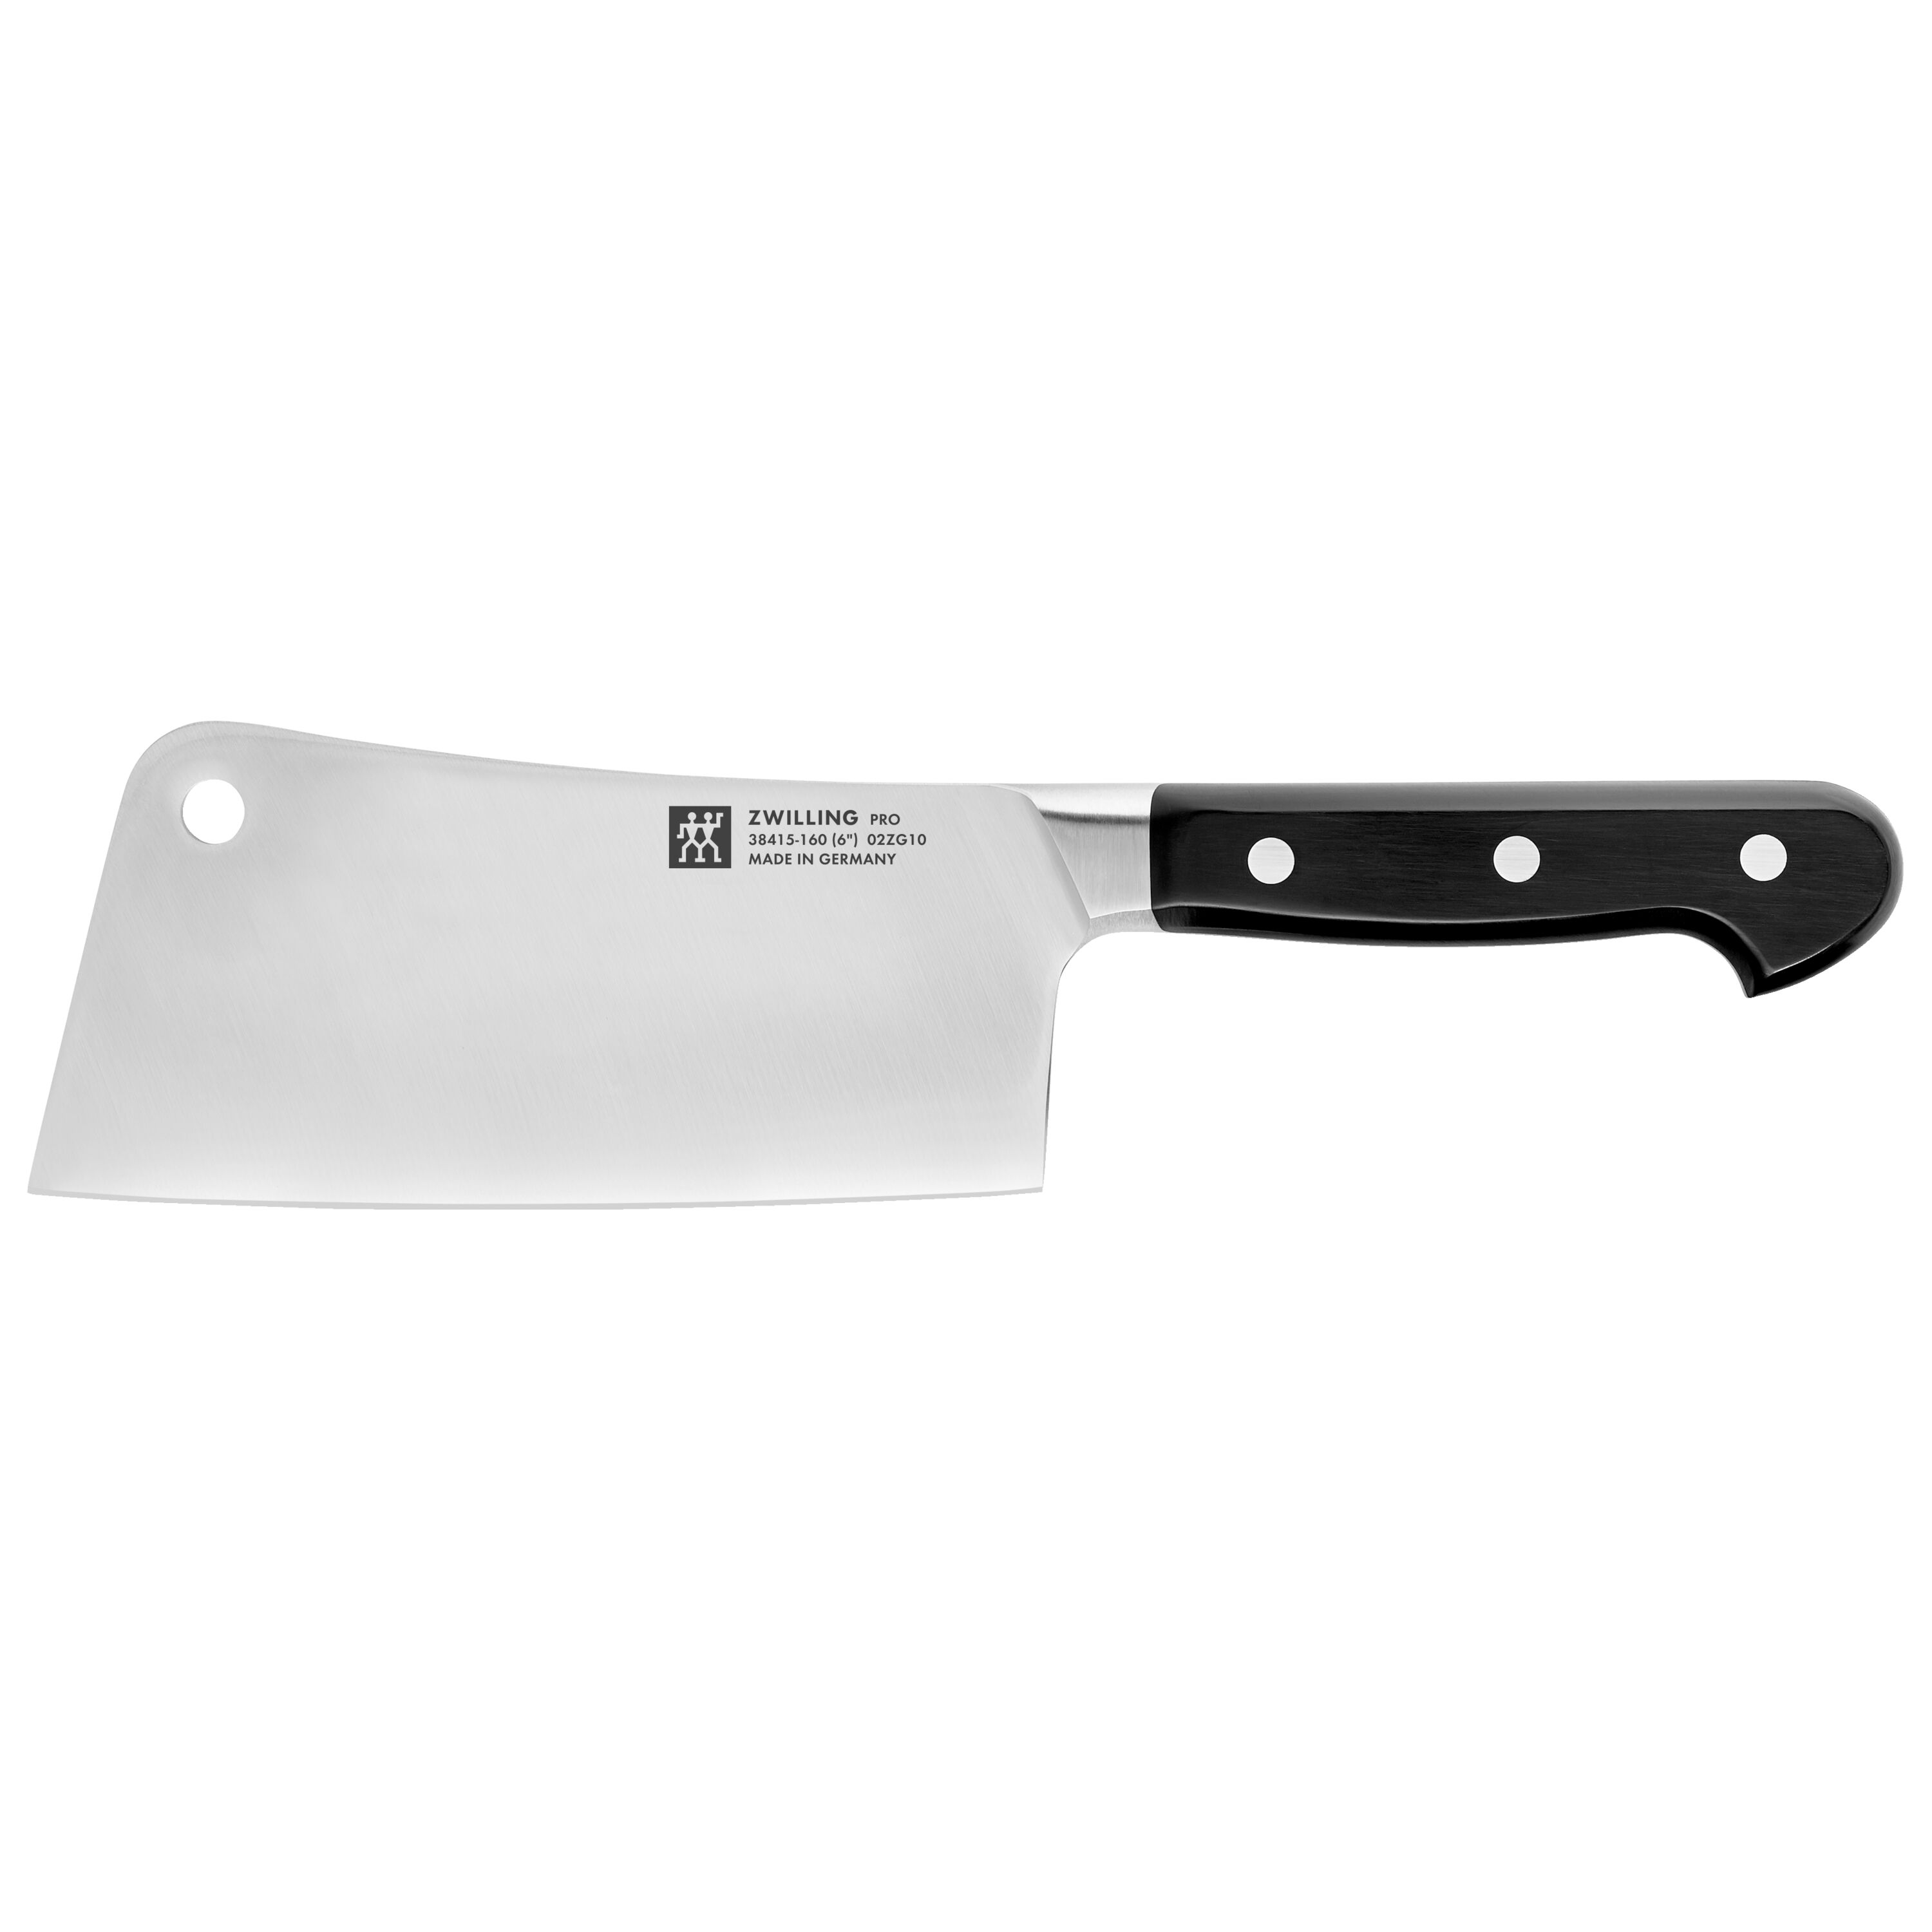 Kitchen Knife Heavy Duty Meat Cleaver 8 Inch Sharp Chinese Chefs Knife High  Carbon Stainless Steel Butcher Laser Chef Knives with Wood Handle 